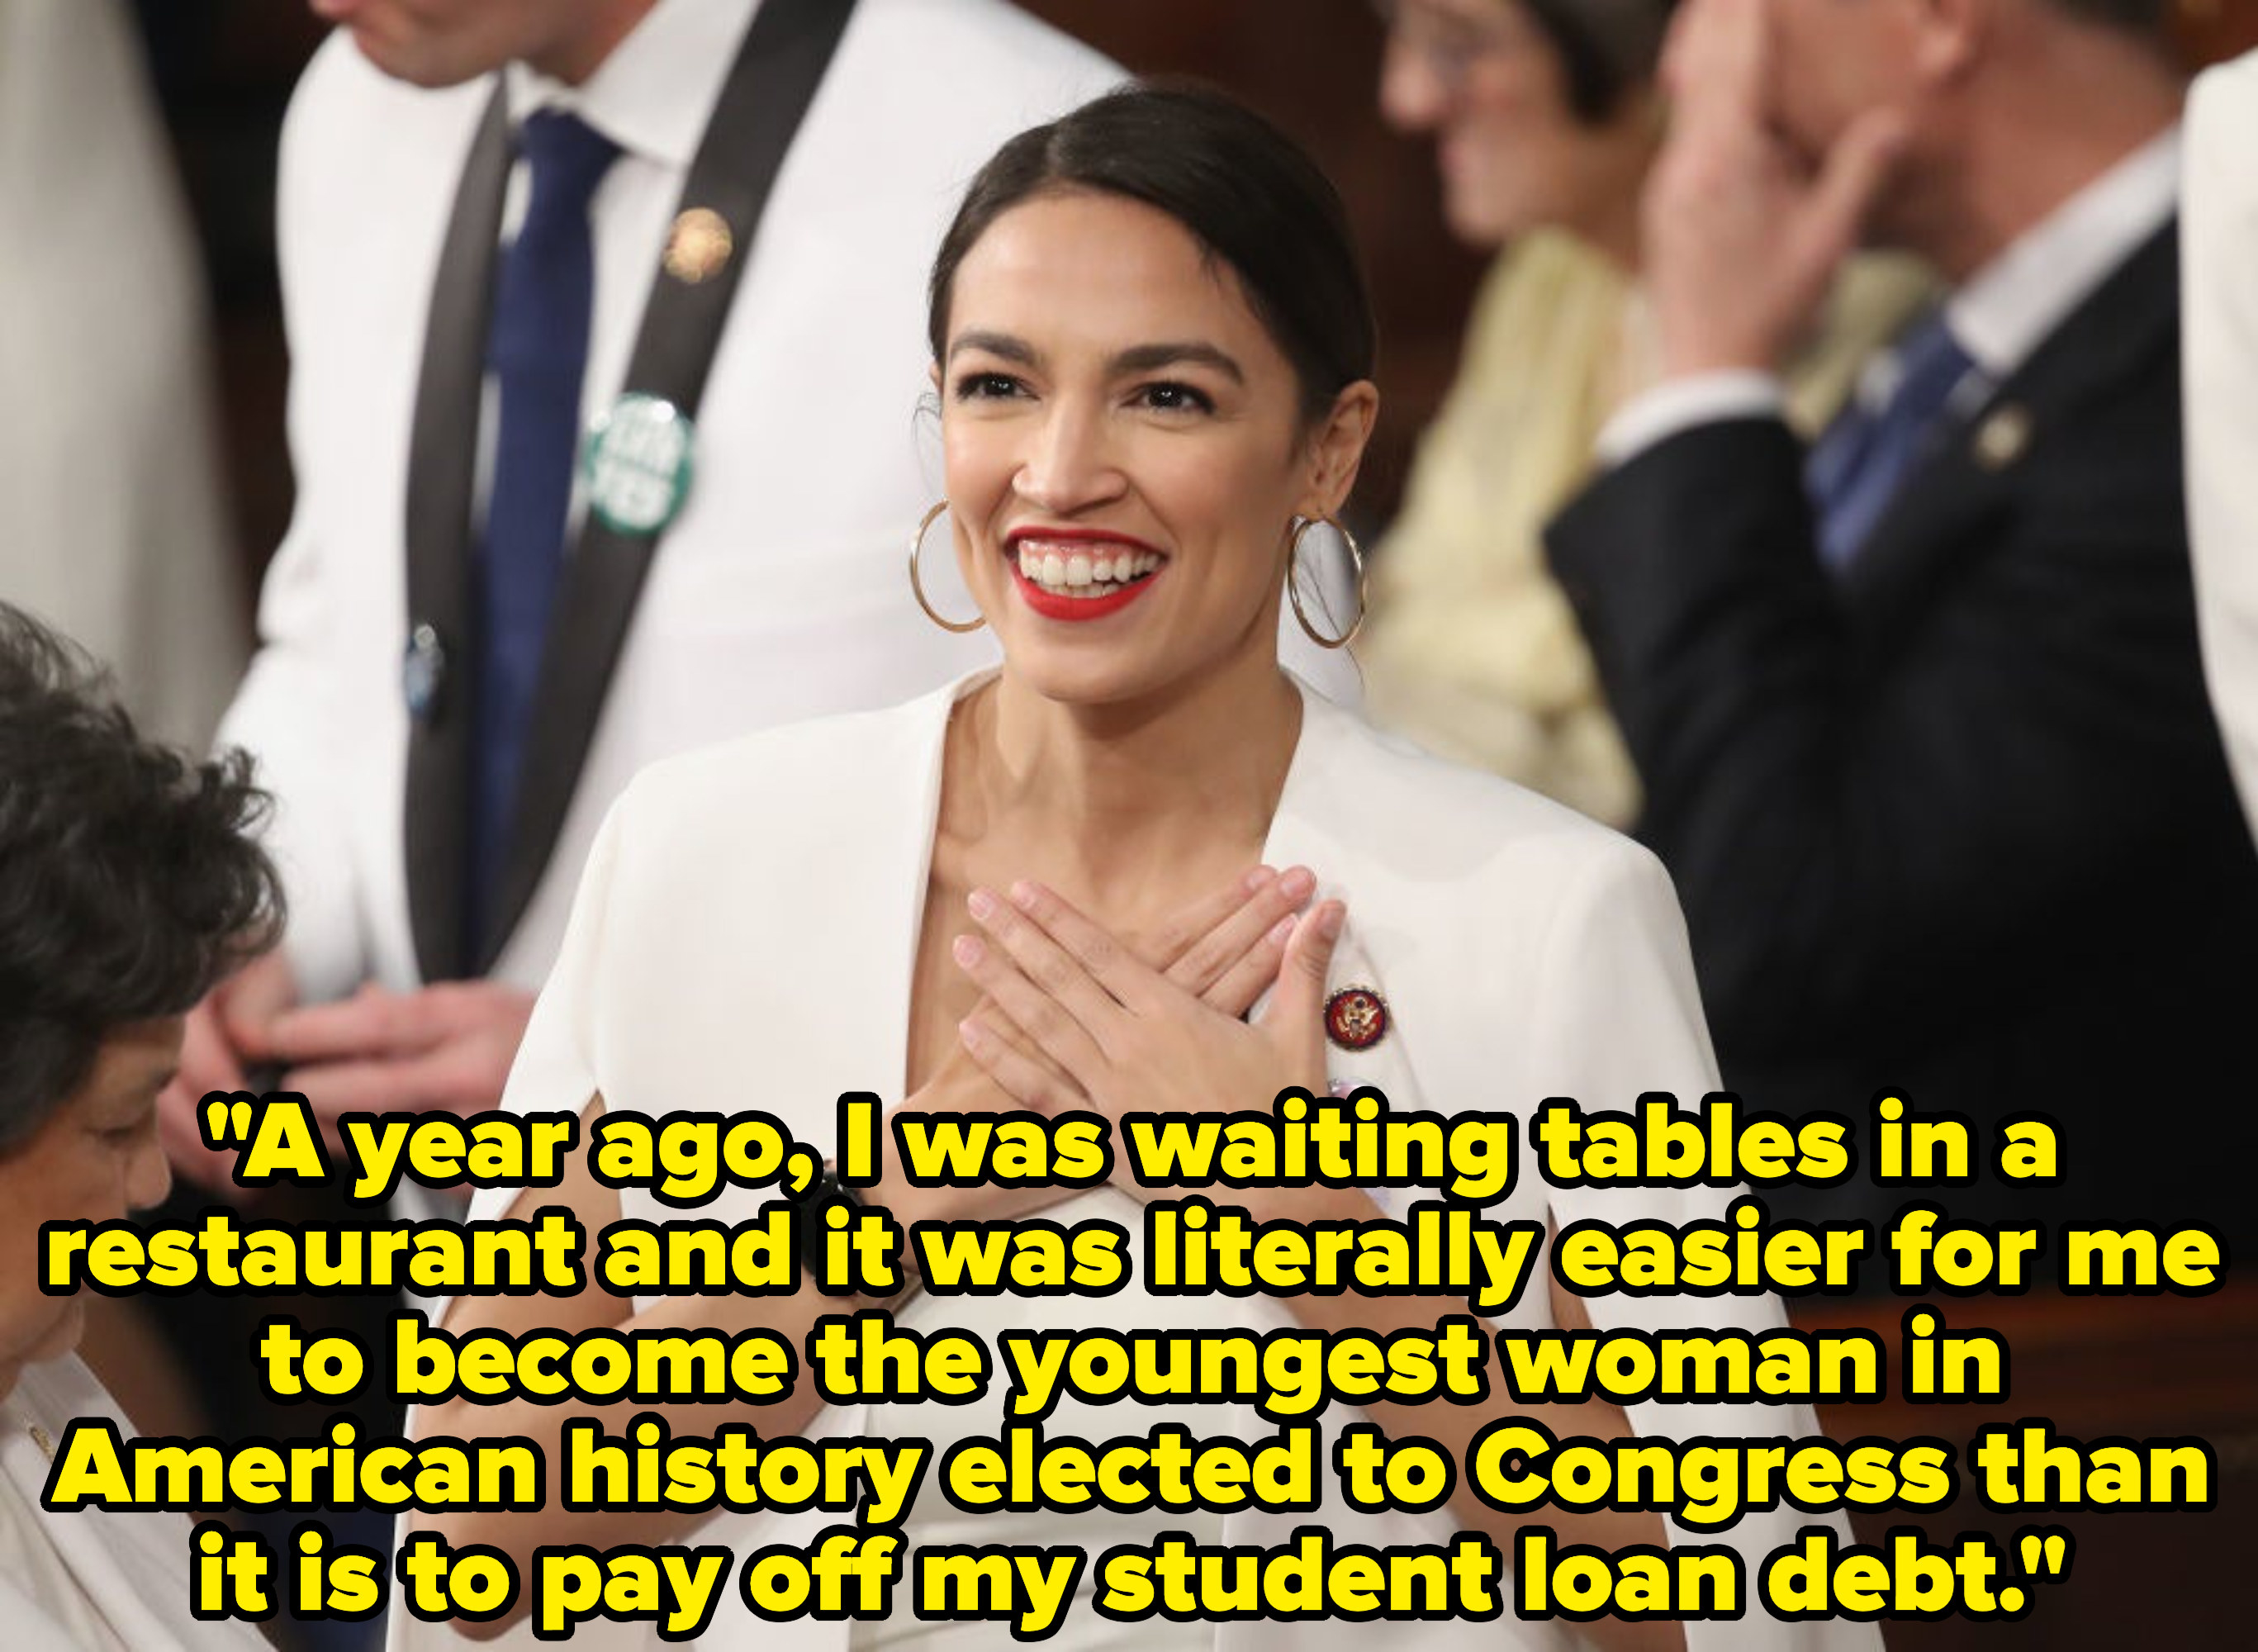 Caption: I think it’s so funny, a year ago, I was waiting tables in a restaurant, and it was literally easier for me to become the youngest woman in American history elected to Congress than it is to pay off my student loan debt